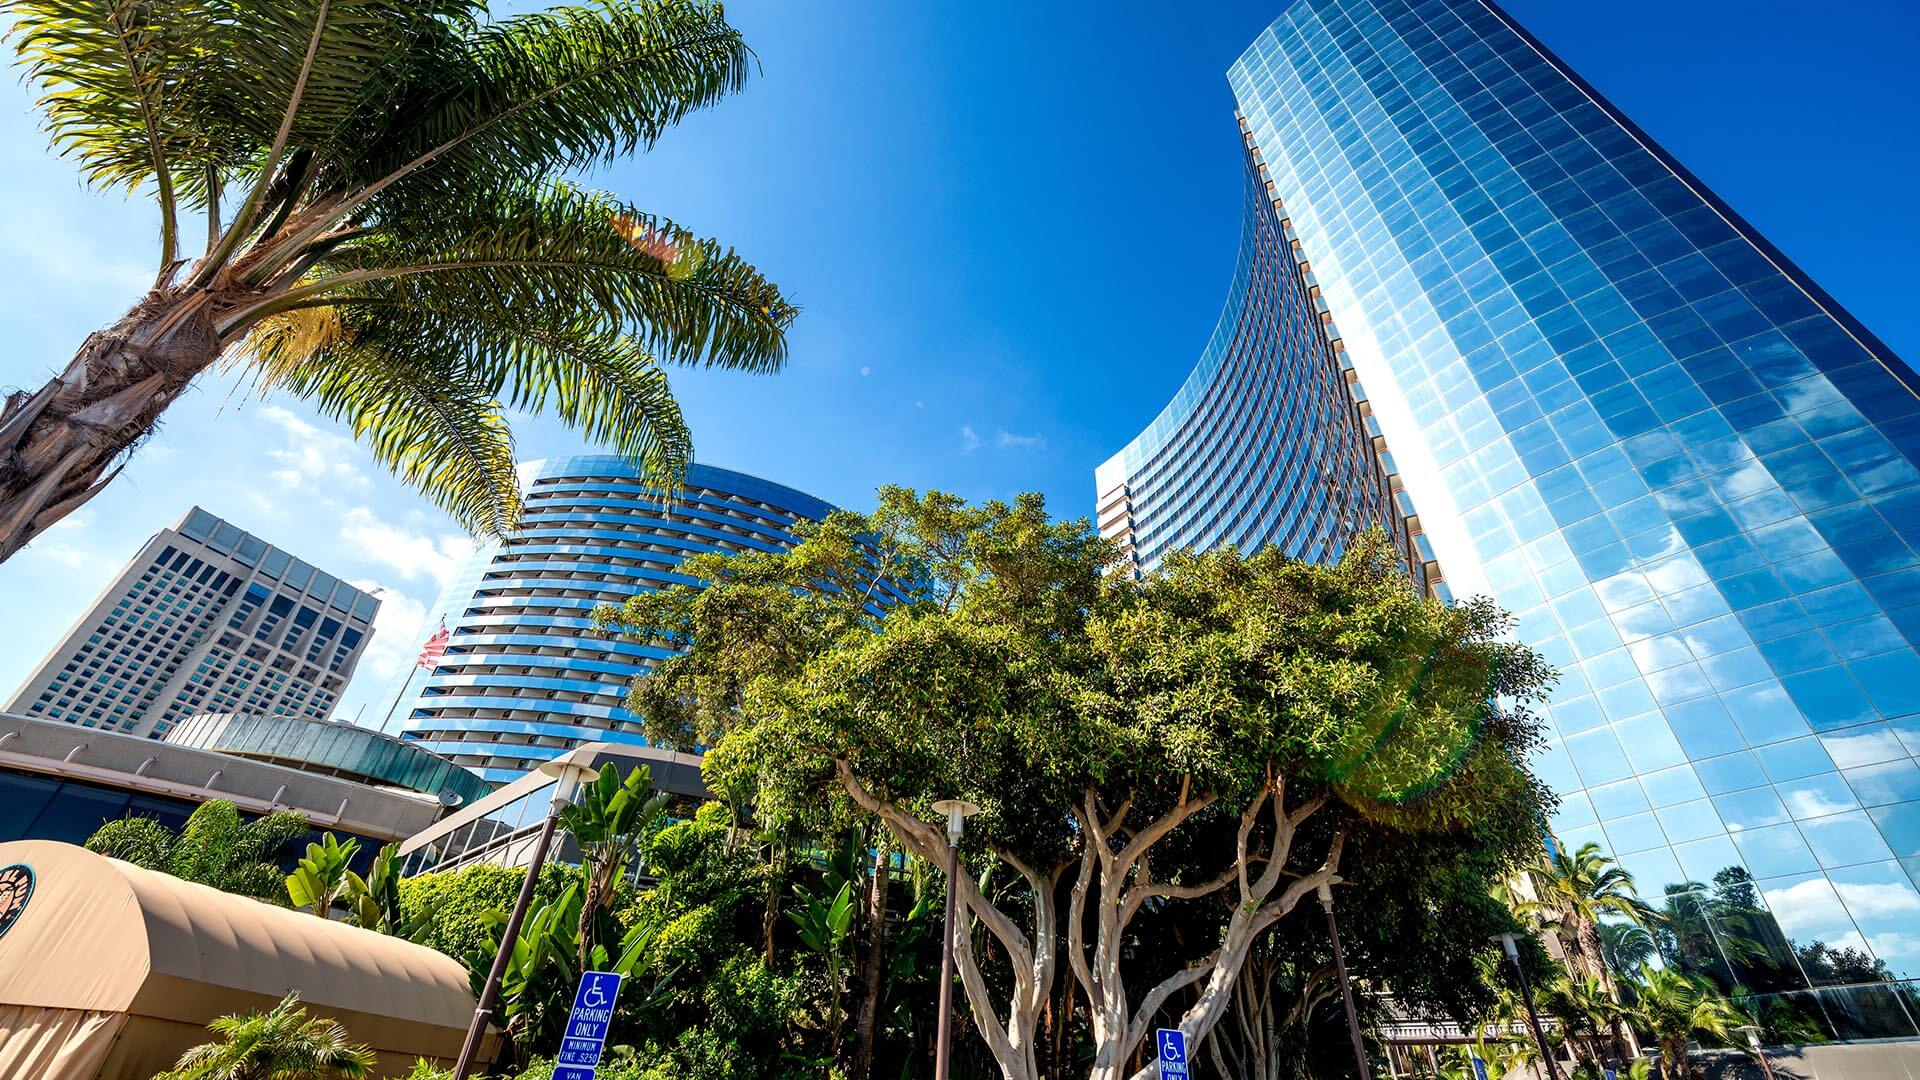 A Marriott property in San Diego, including two glass-facade towers